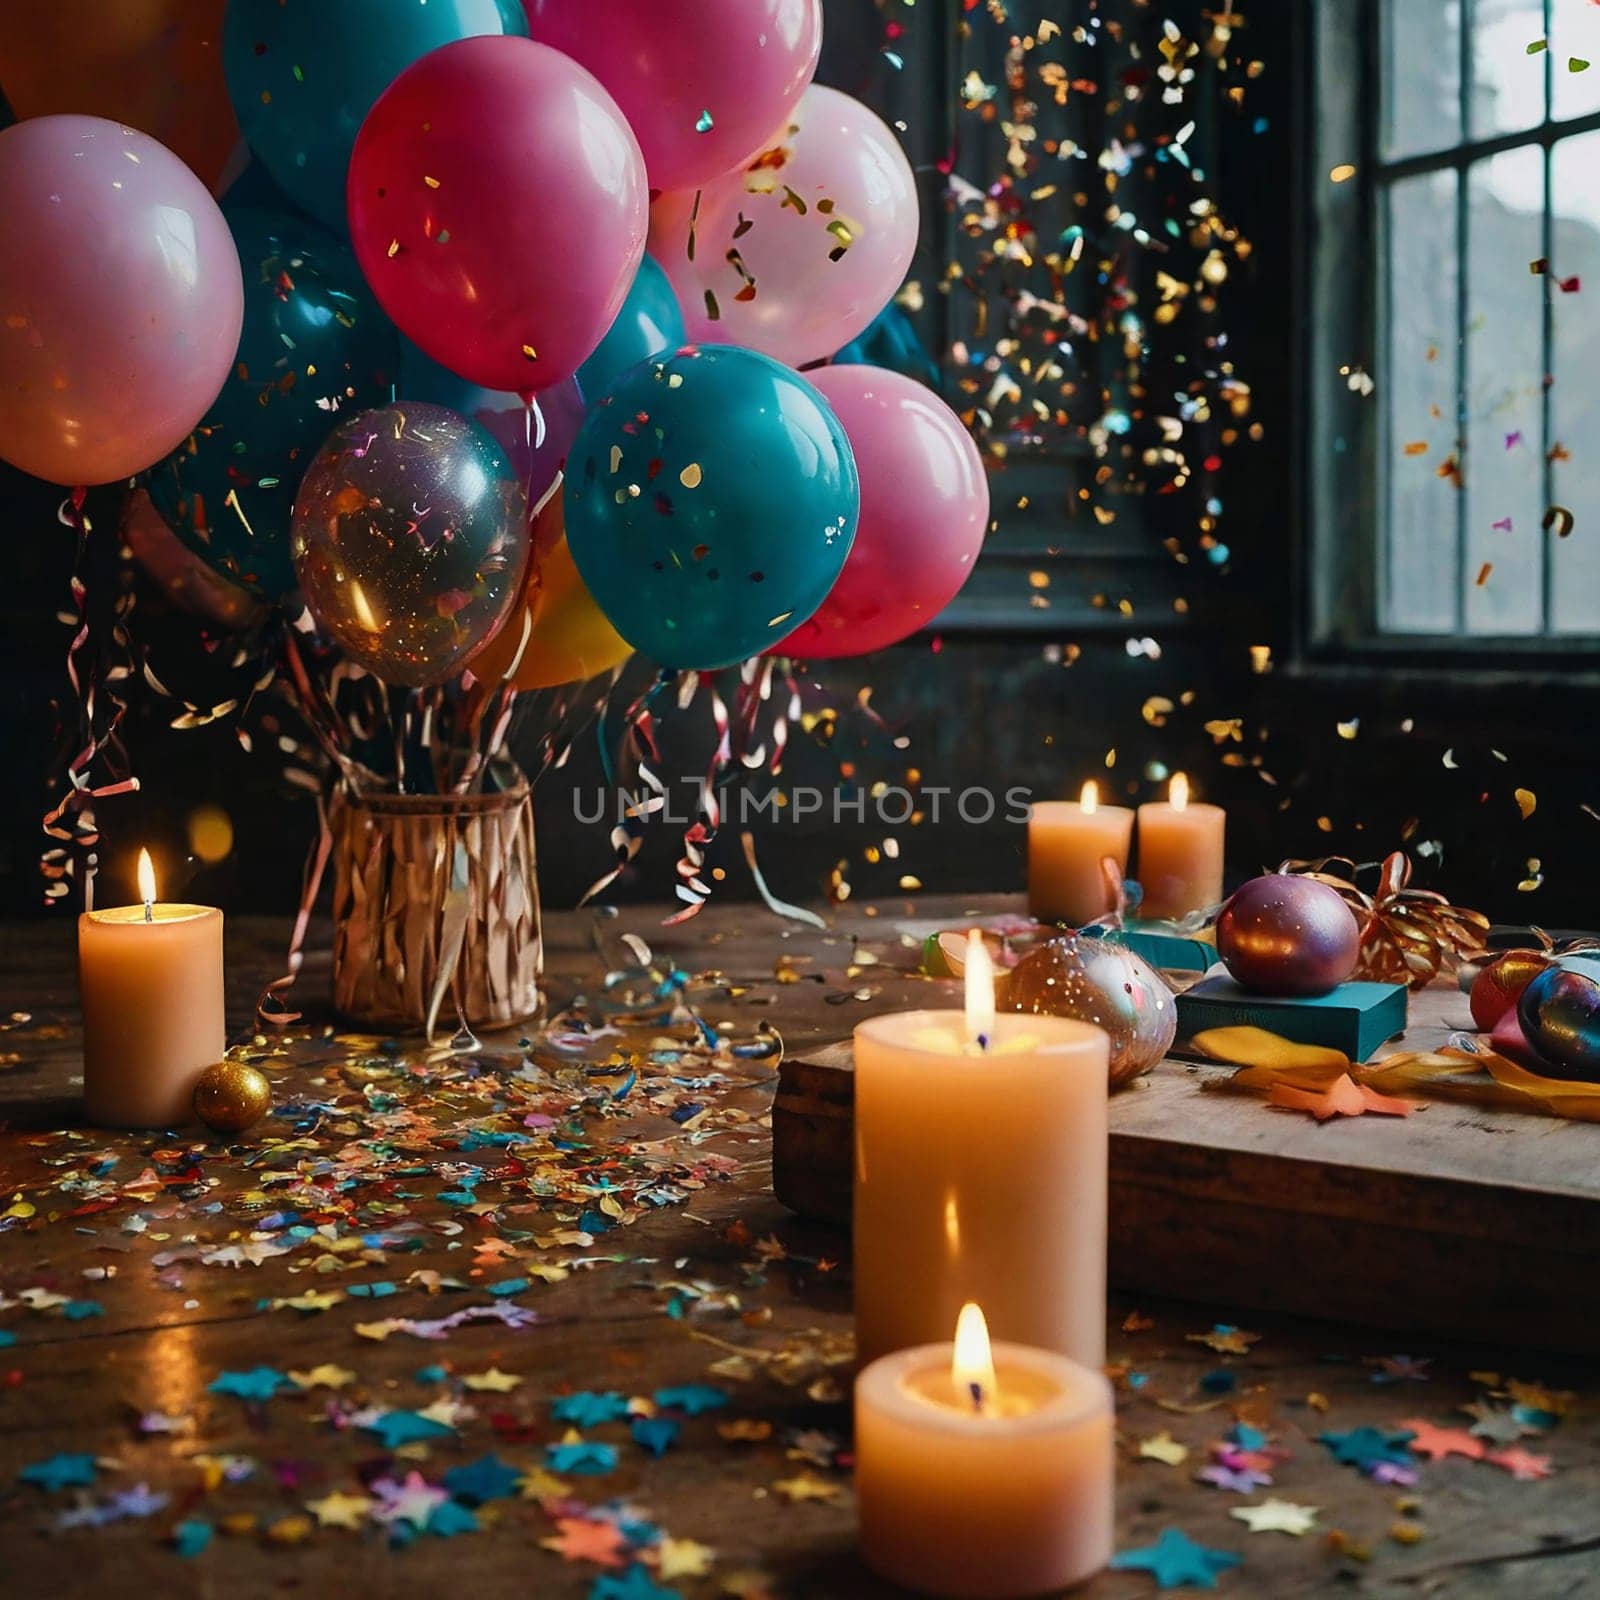 Lots of colorful festive balloons and confetti by VeronikaAngo